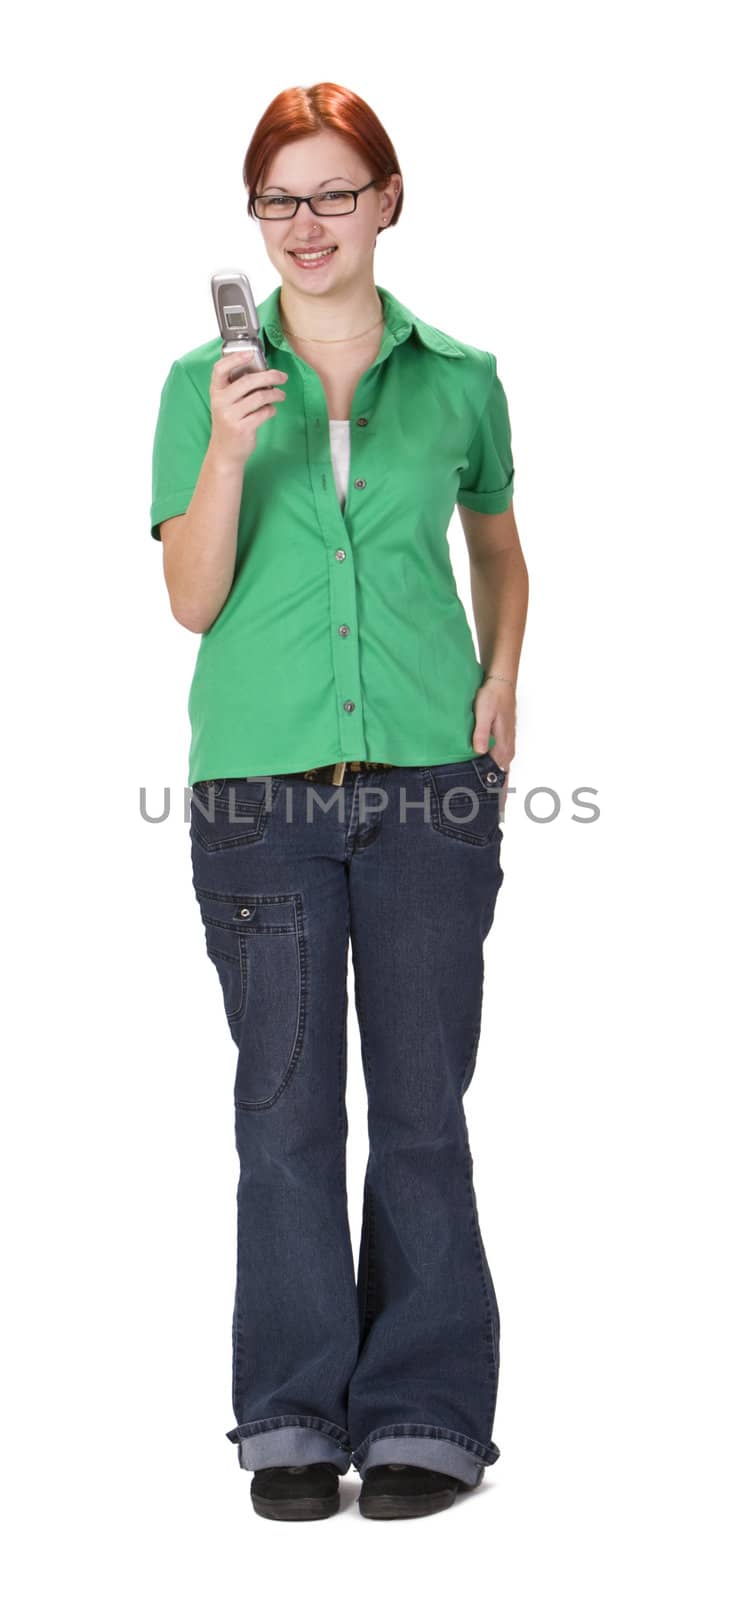 Smiling redheaded girl using a mobile phone while is standing up.